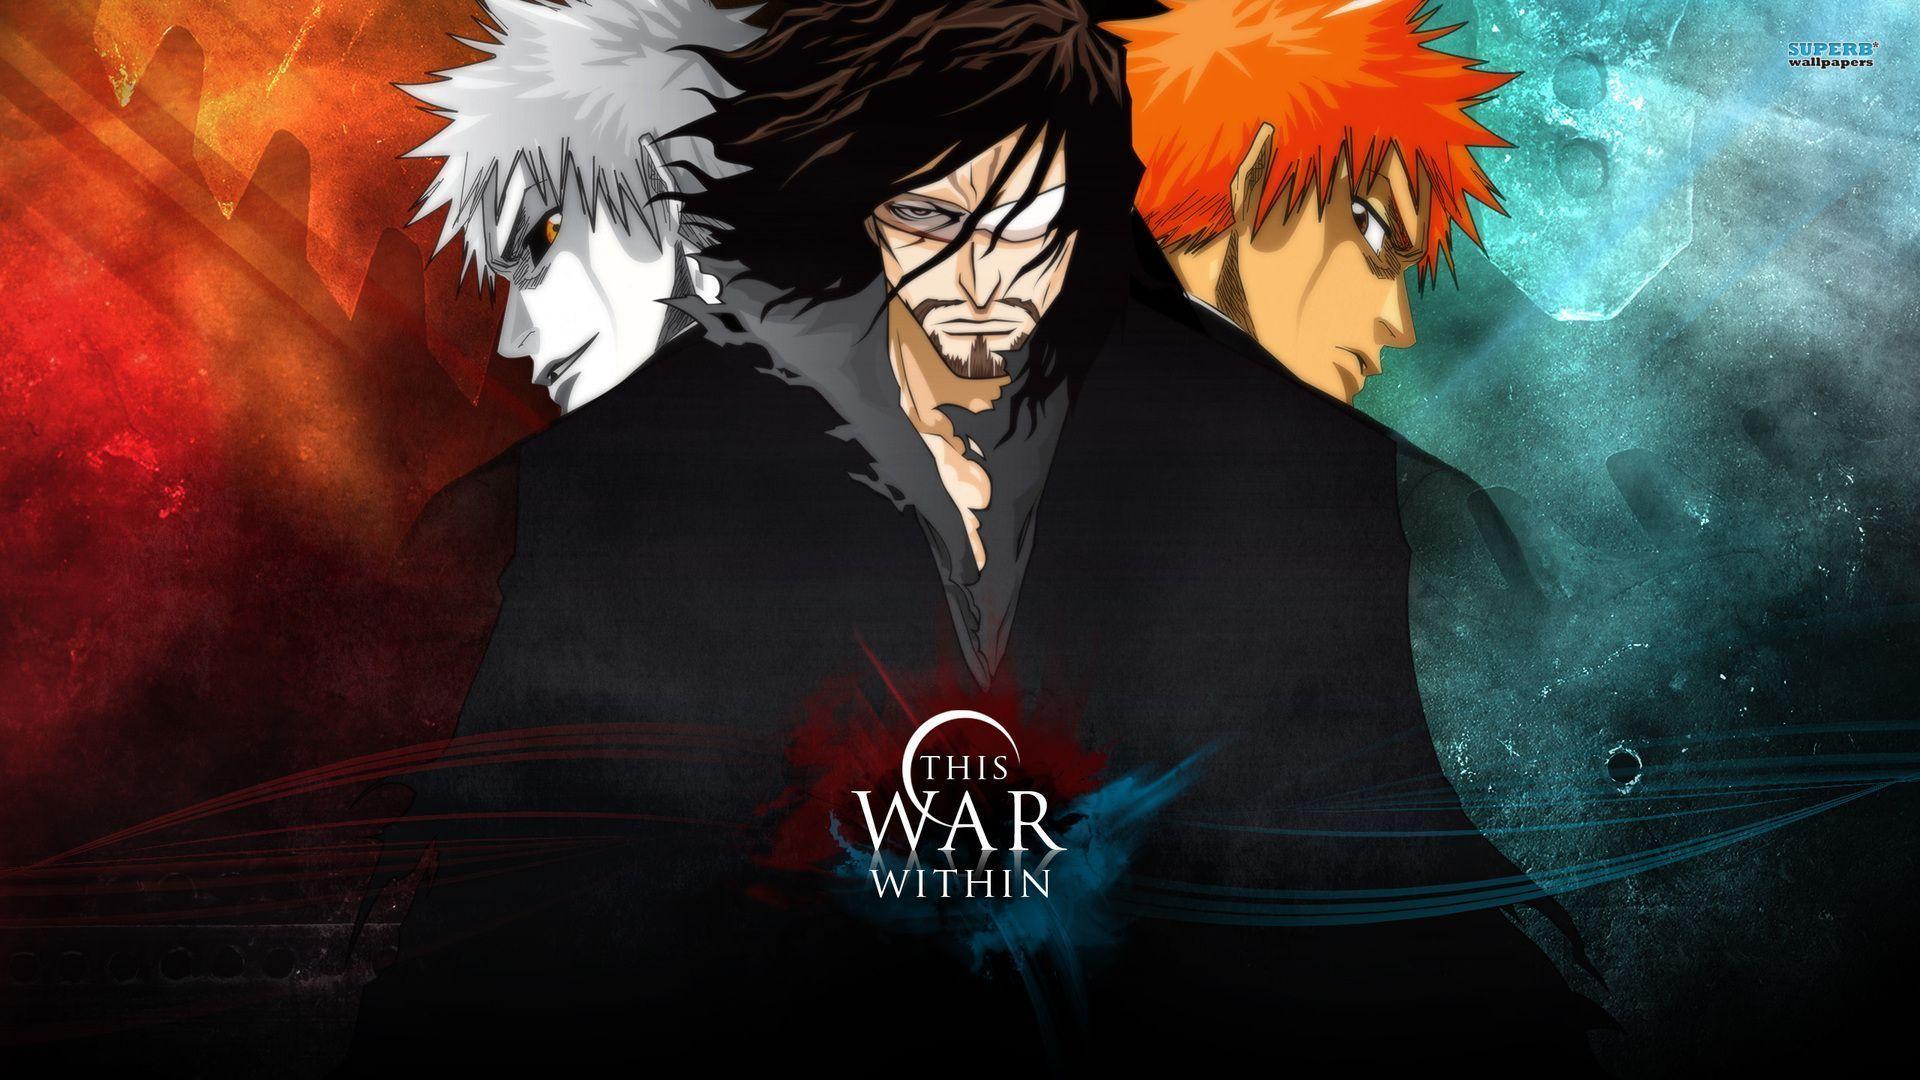 3500 Anime Bleach HD Wallpapers and Backgrounds